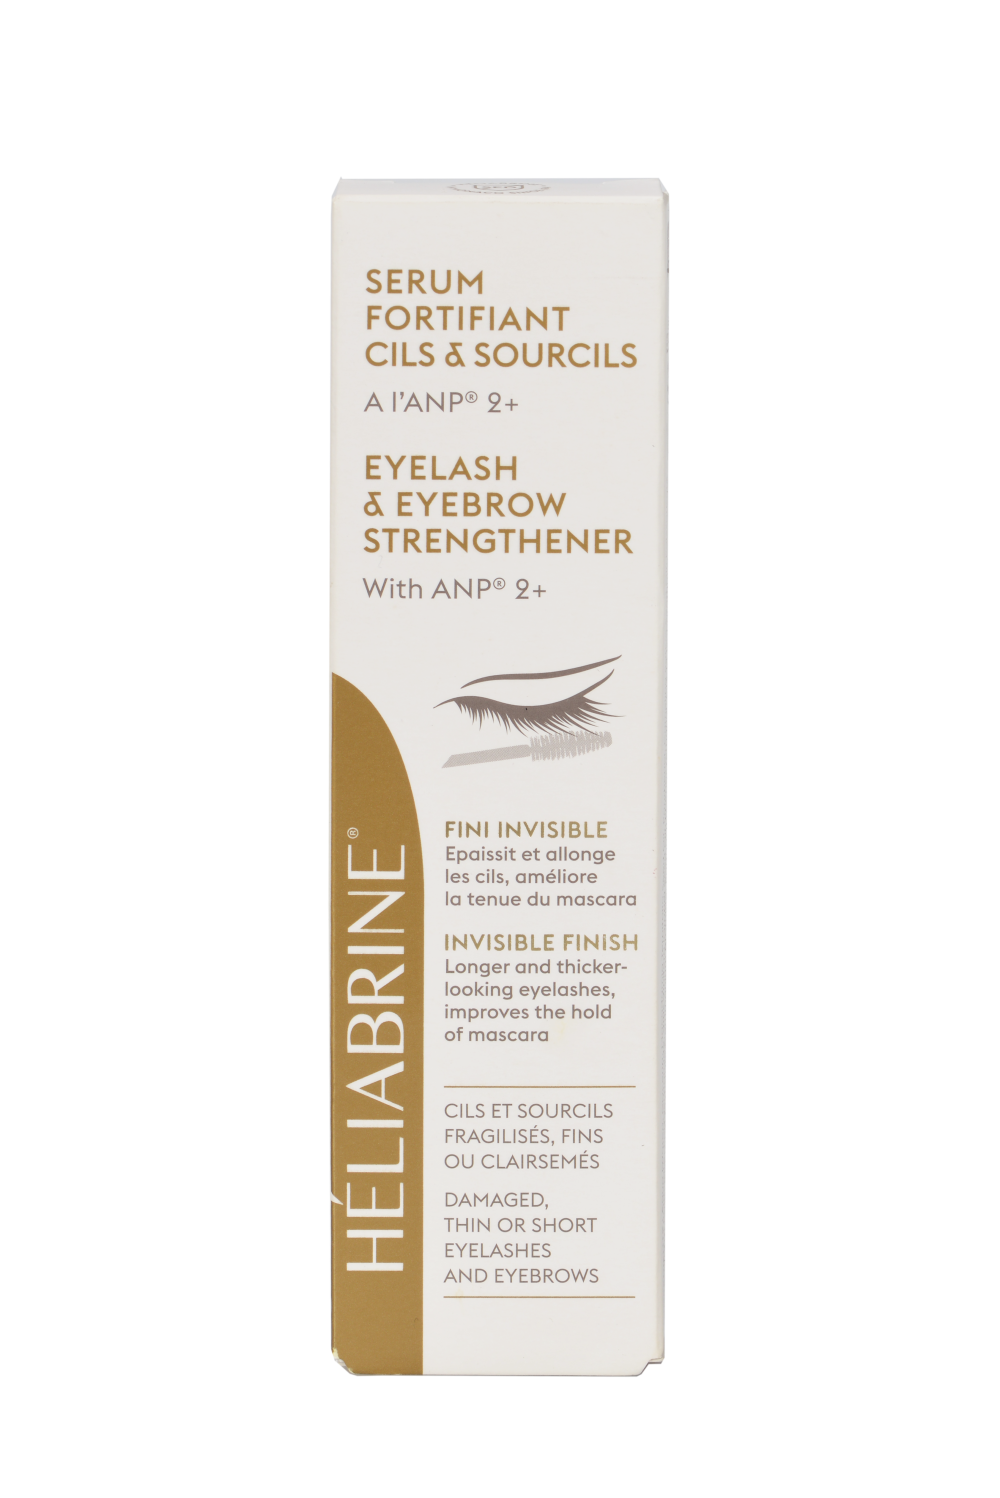 EYELASH AND EYEBROWS STRENGTHENER FACE CARE WITH ANP®2+